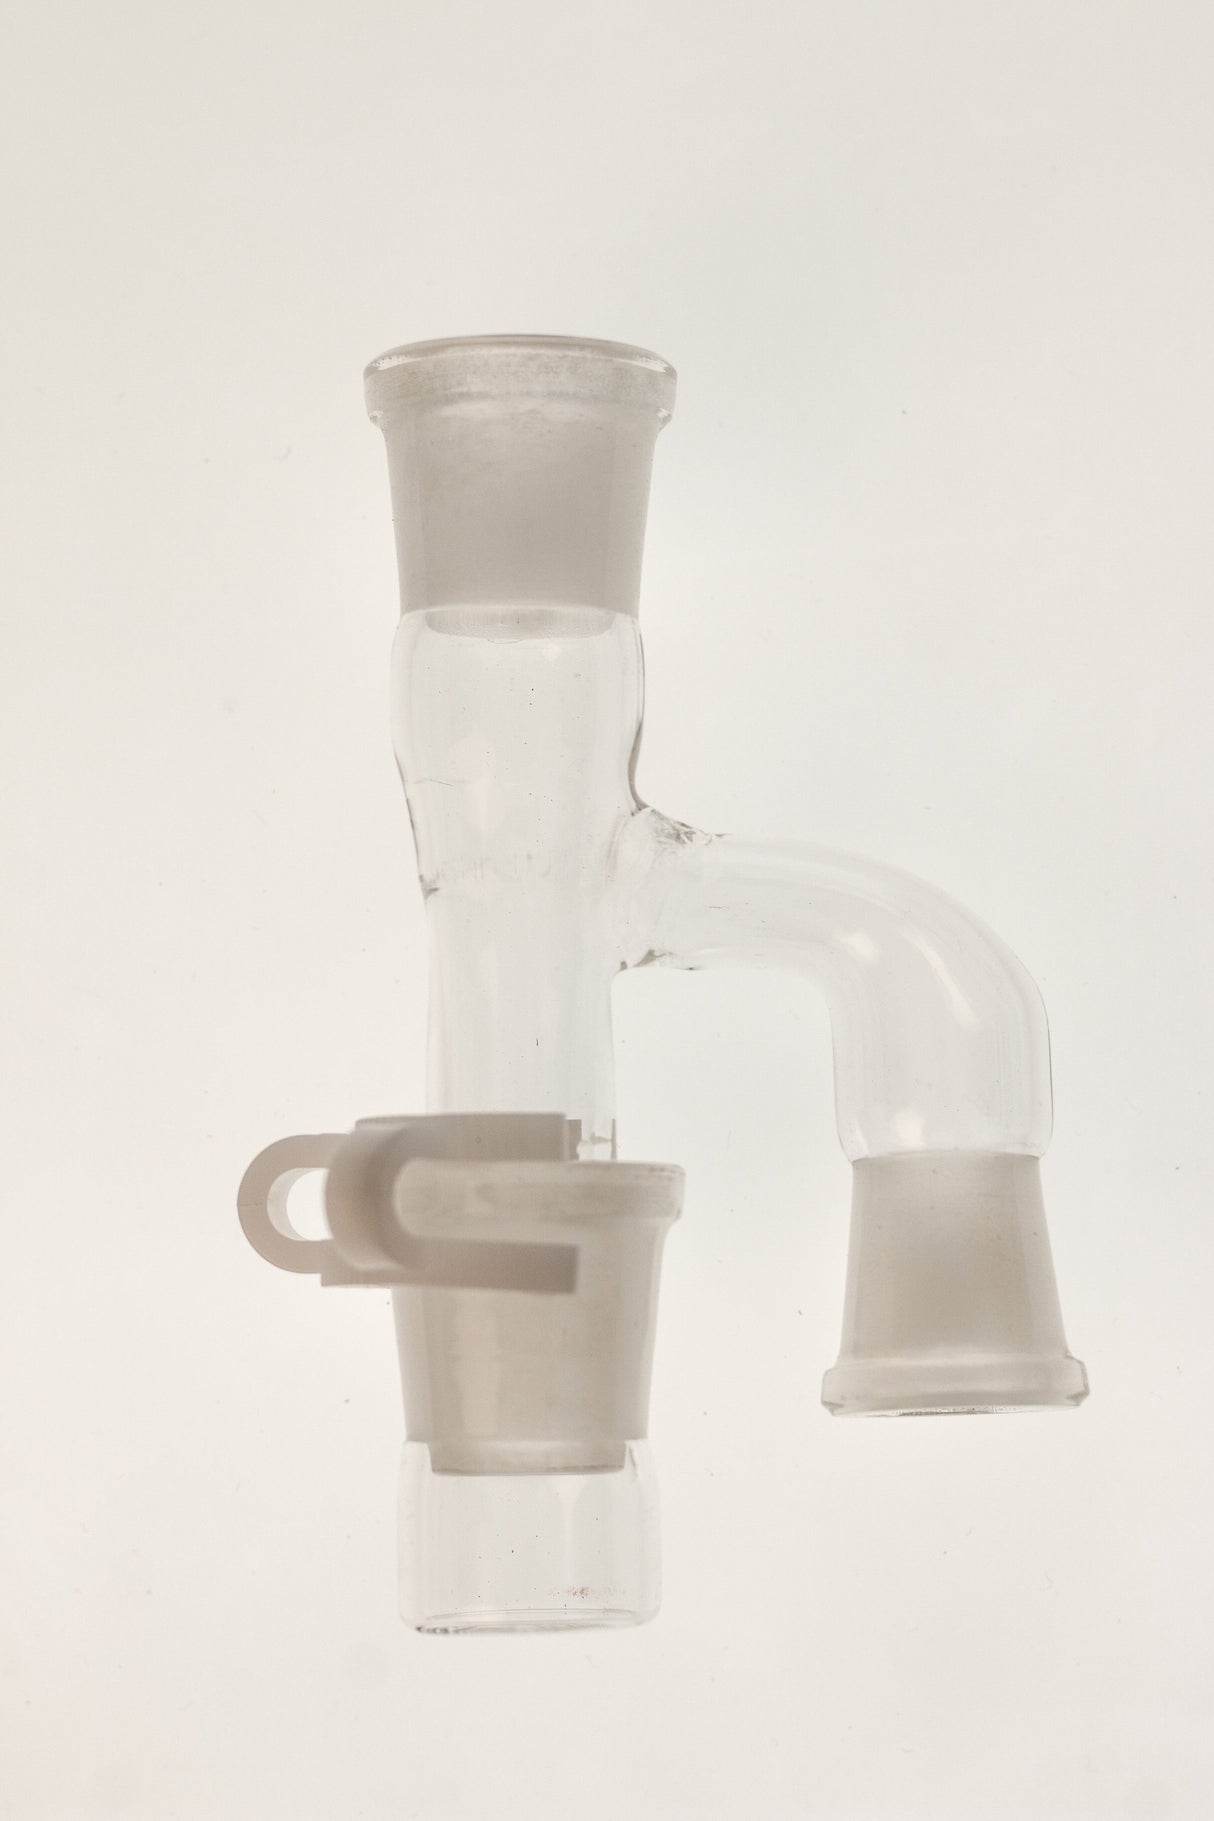 TAG - Clear Reclaim Adapter with Dish & Keck Clip for Bongs, 14-18mm Female Joint - Side View